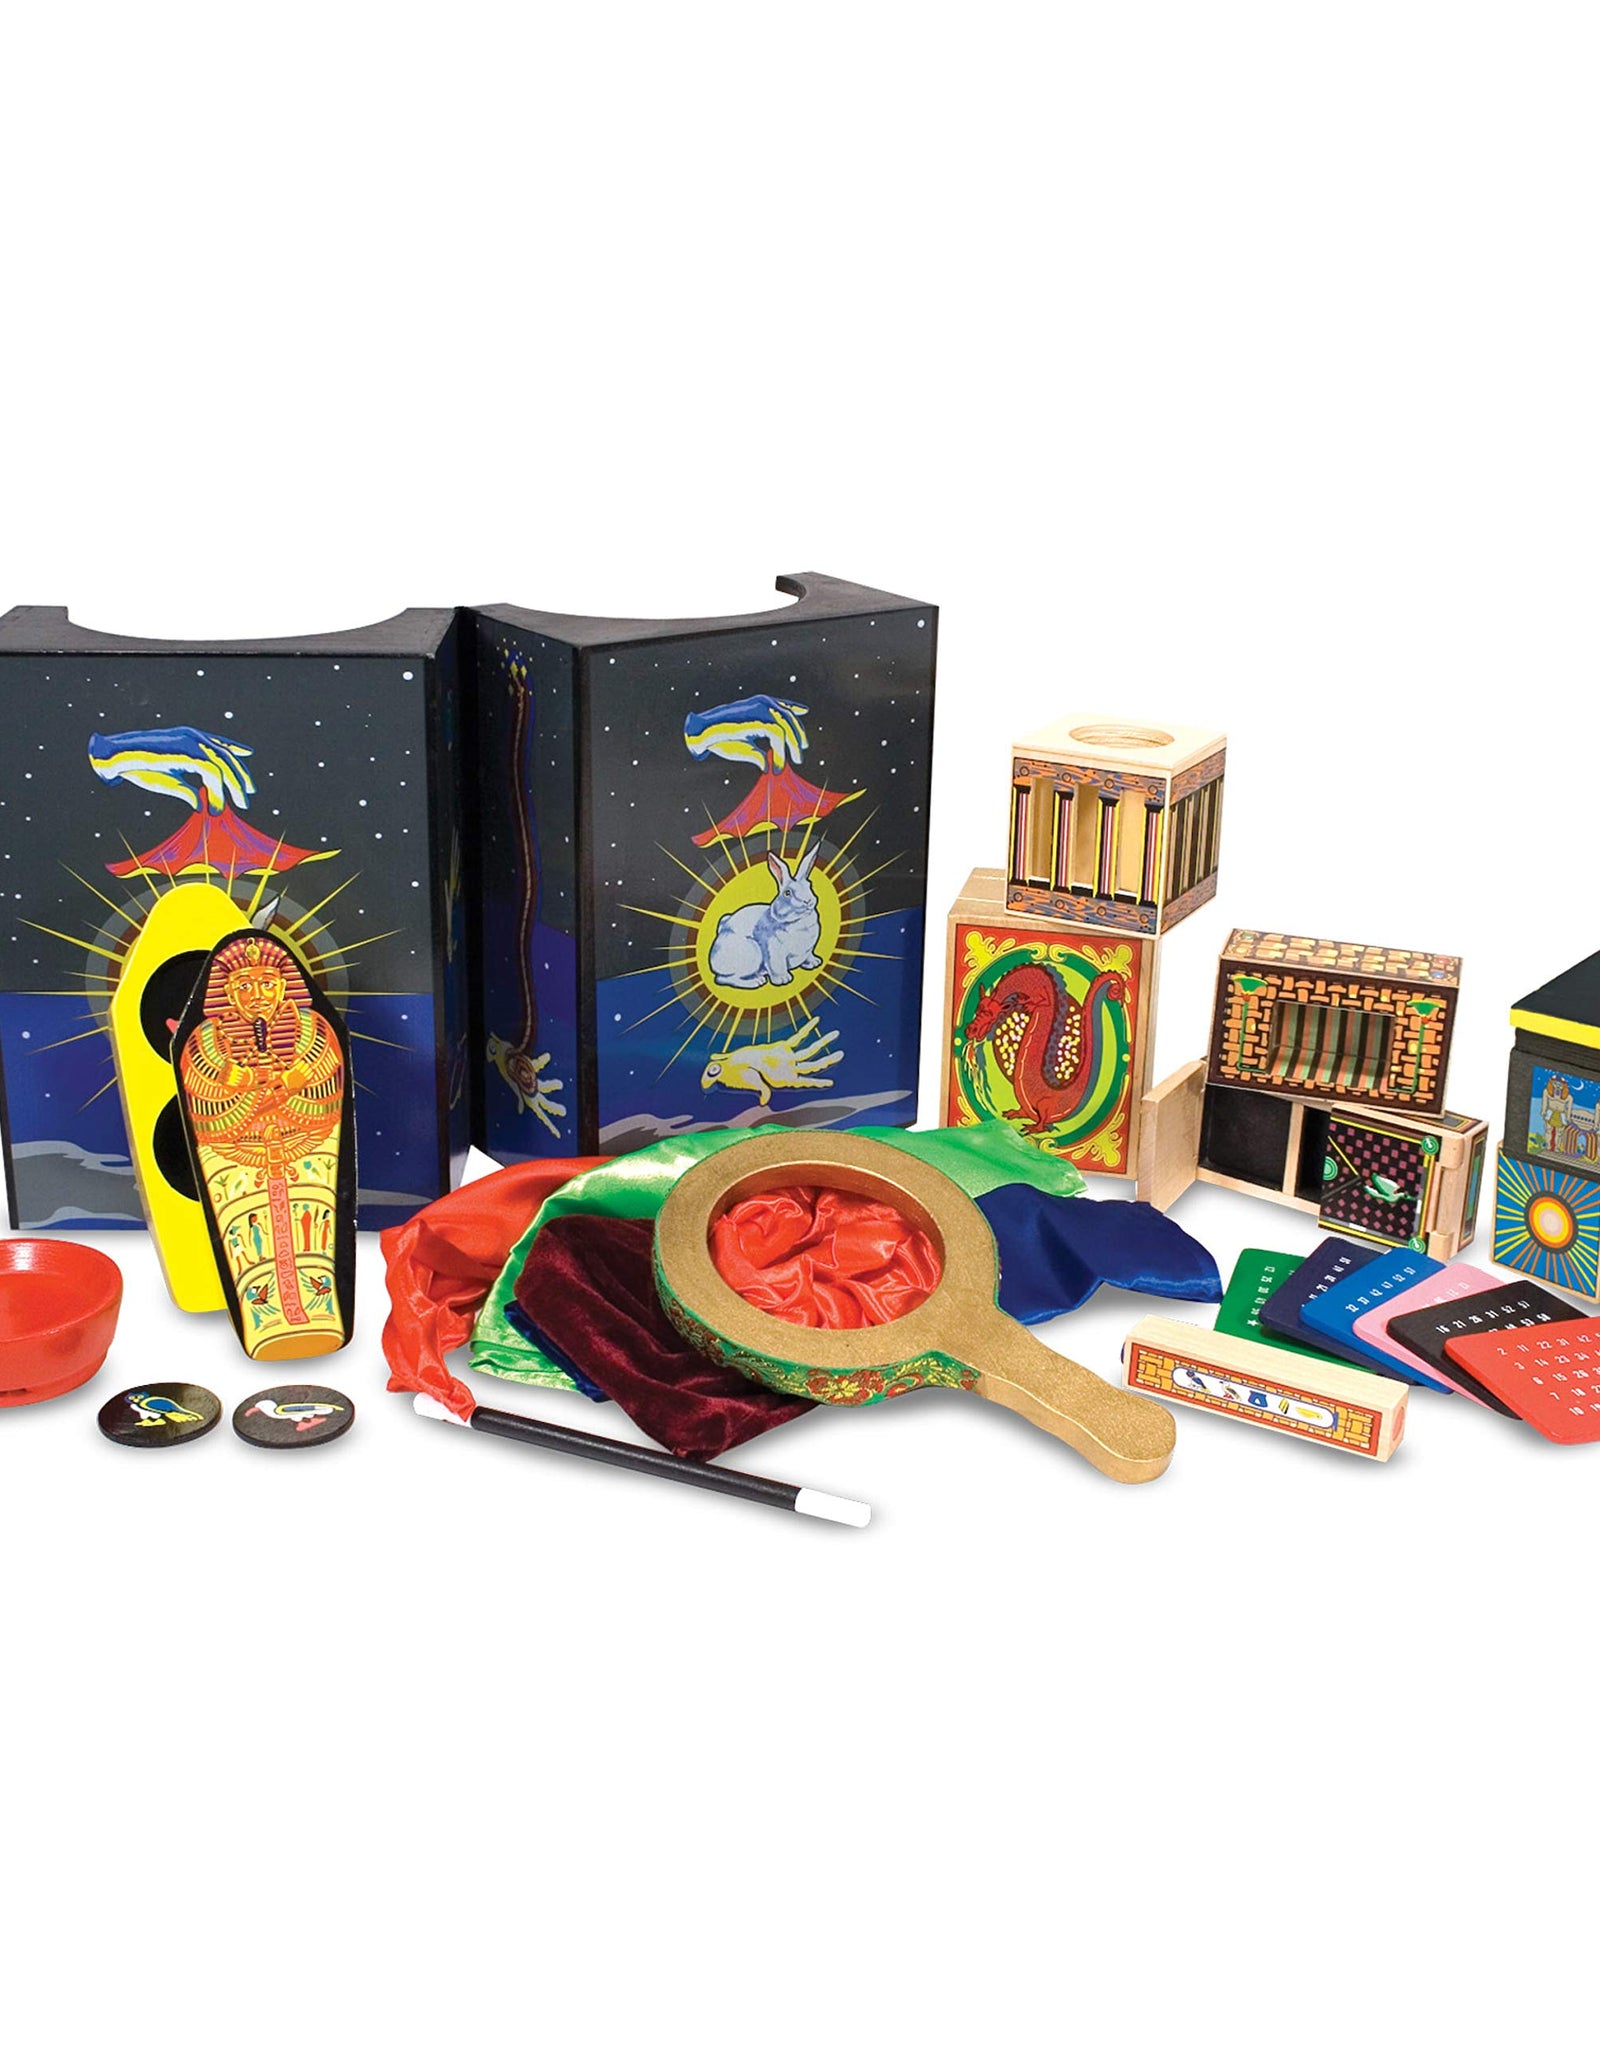 Melissa & Doug Deluxe Solid-Wood Magic Set With 10 Classic Tricks